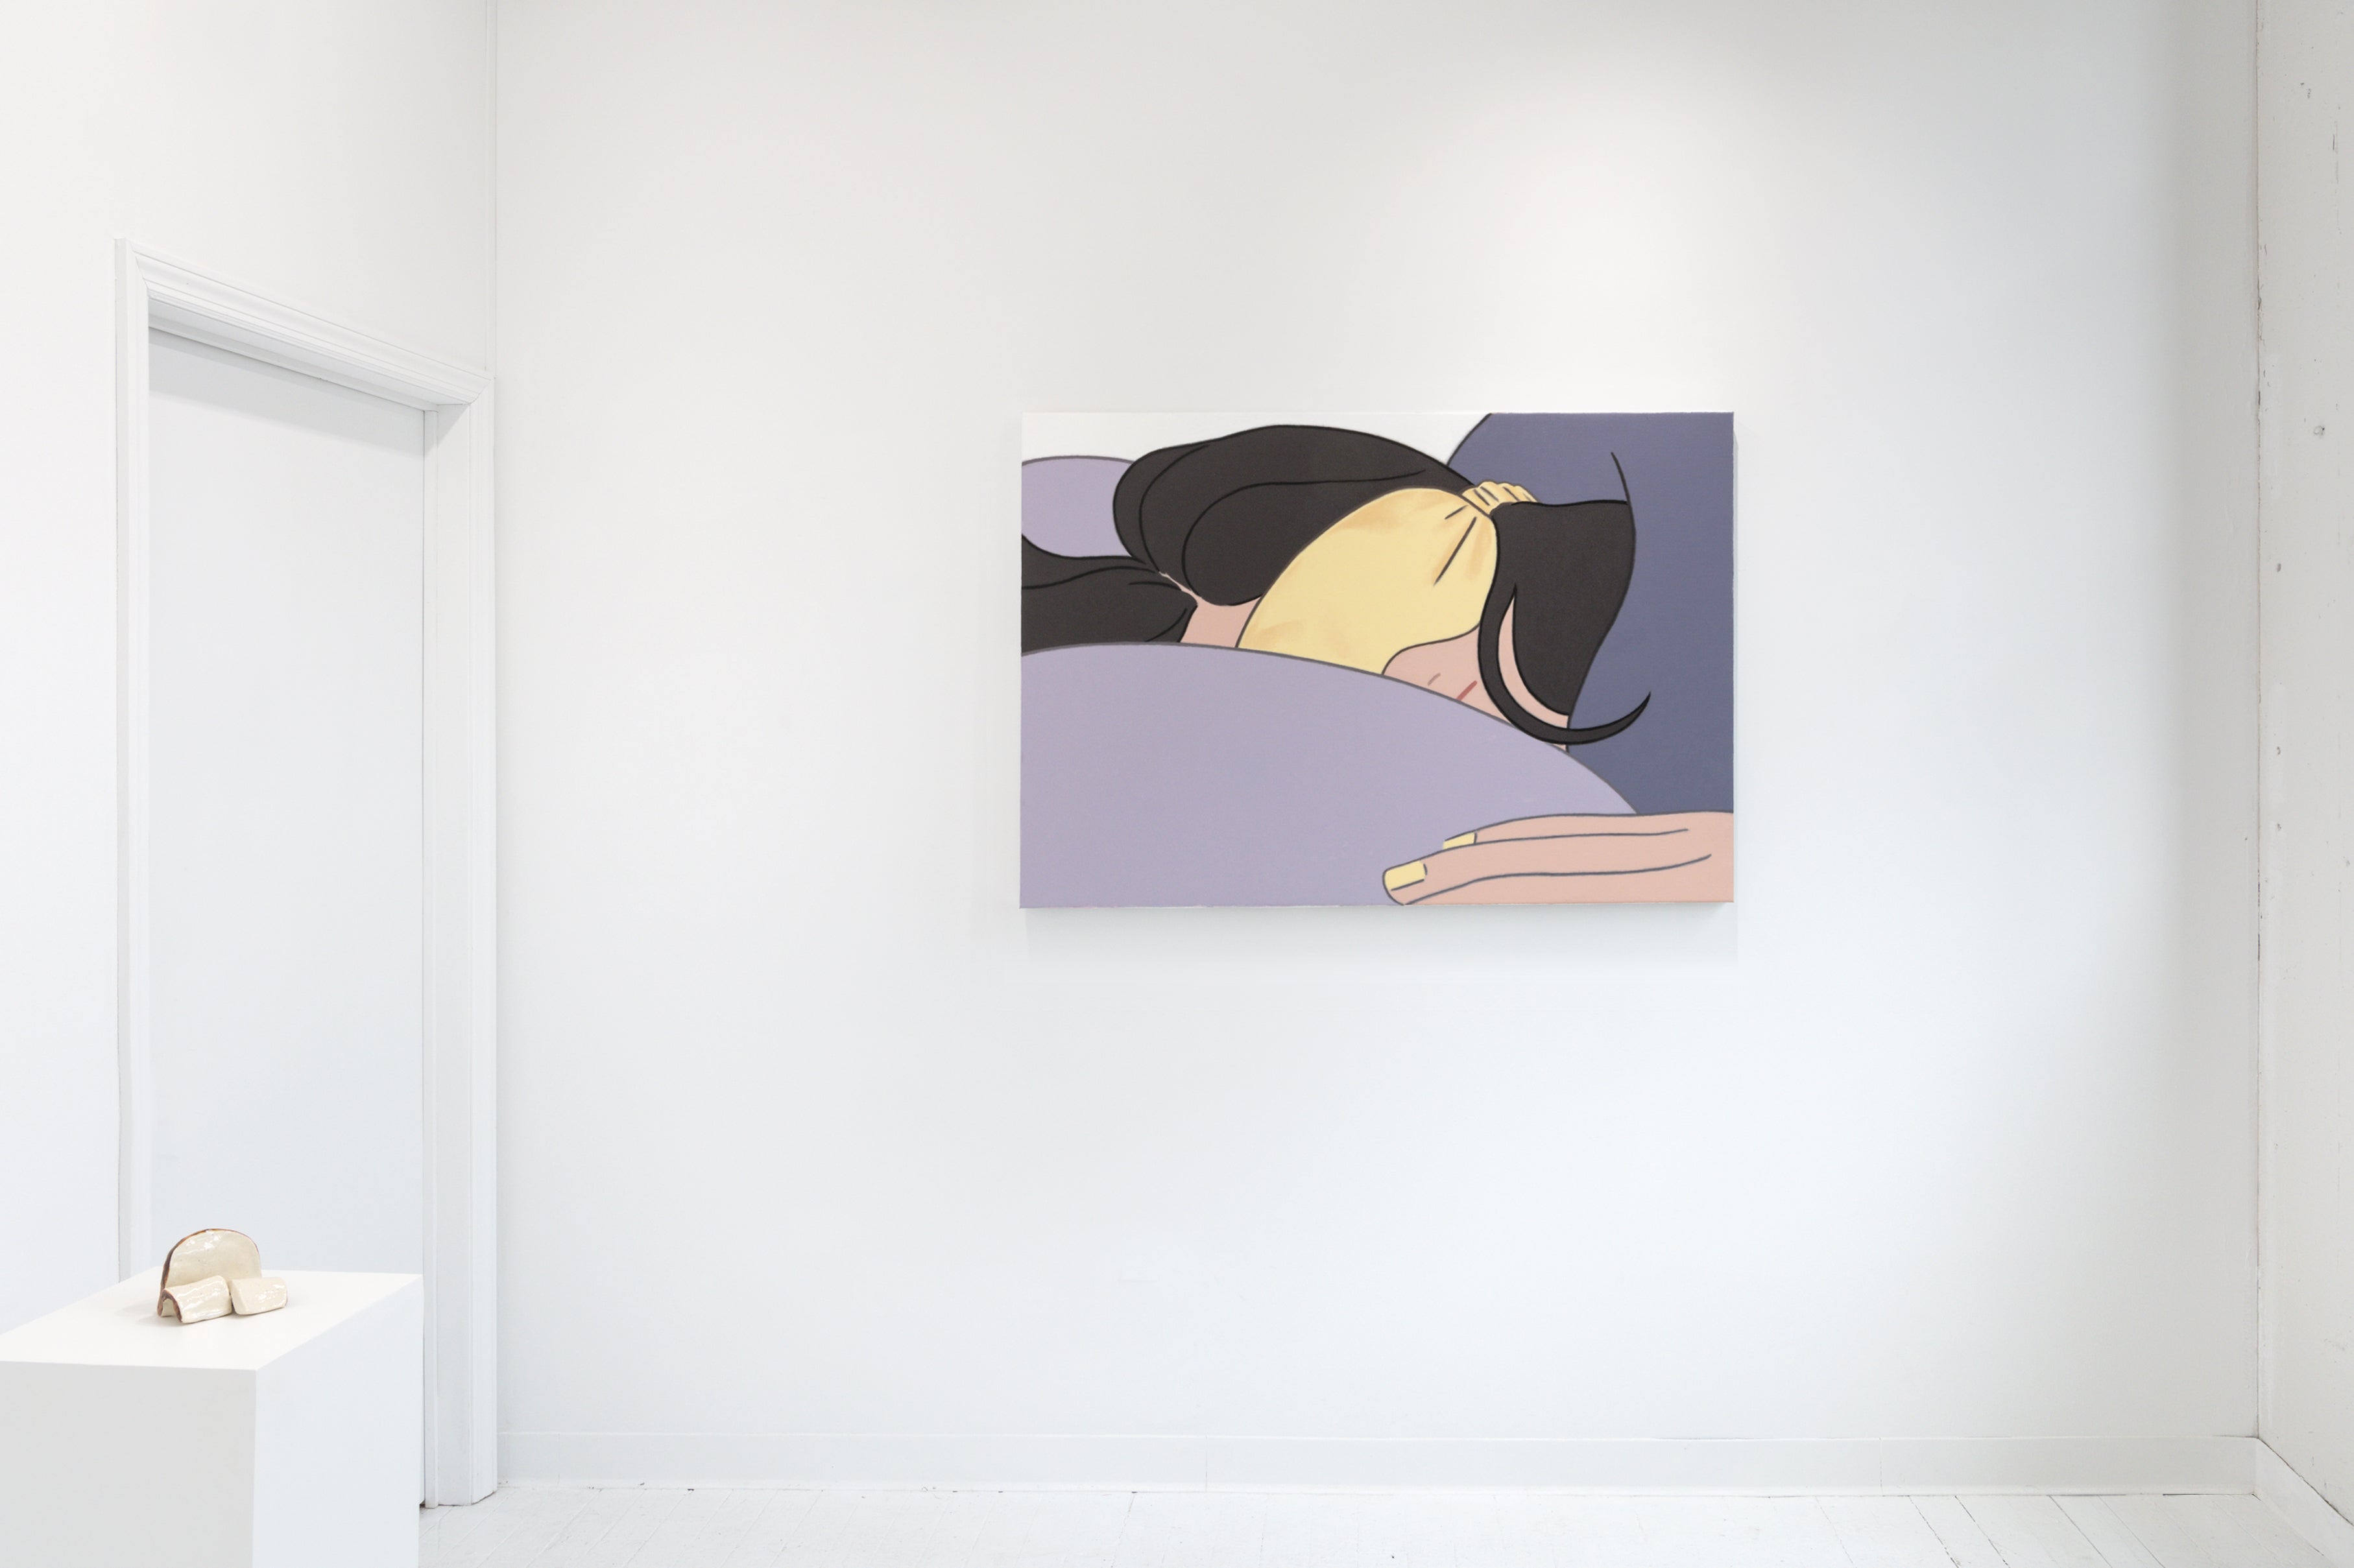 Installation view of Lilou's exhibition at Yi Gallery